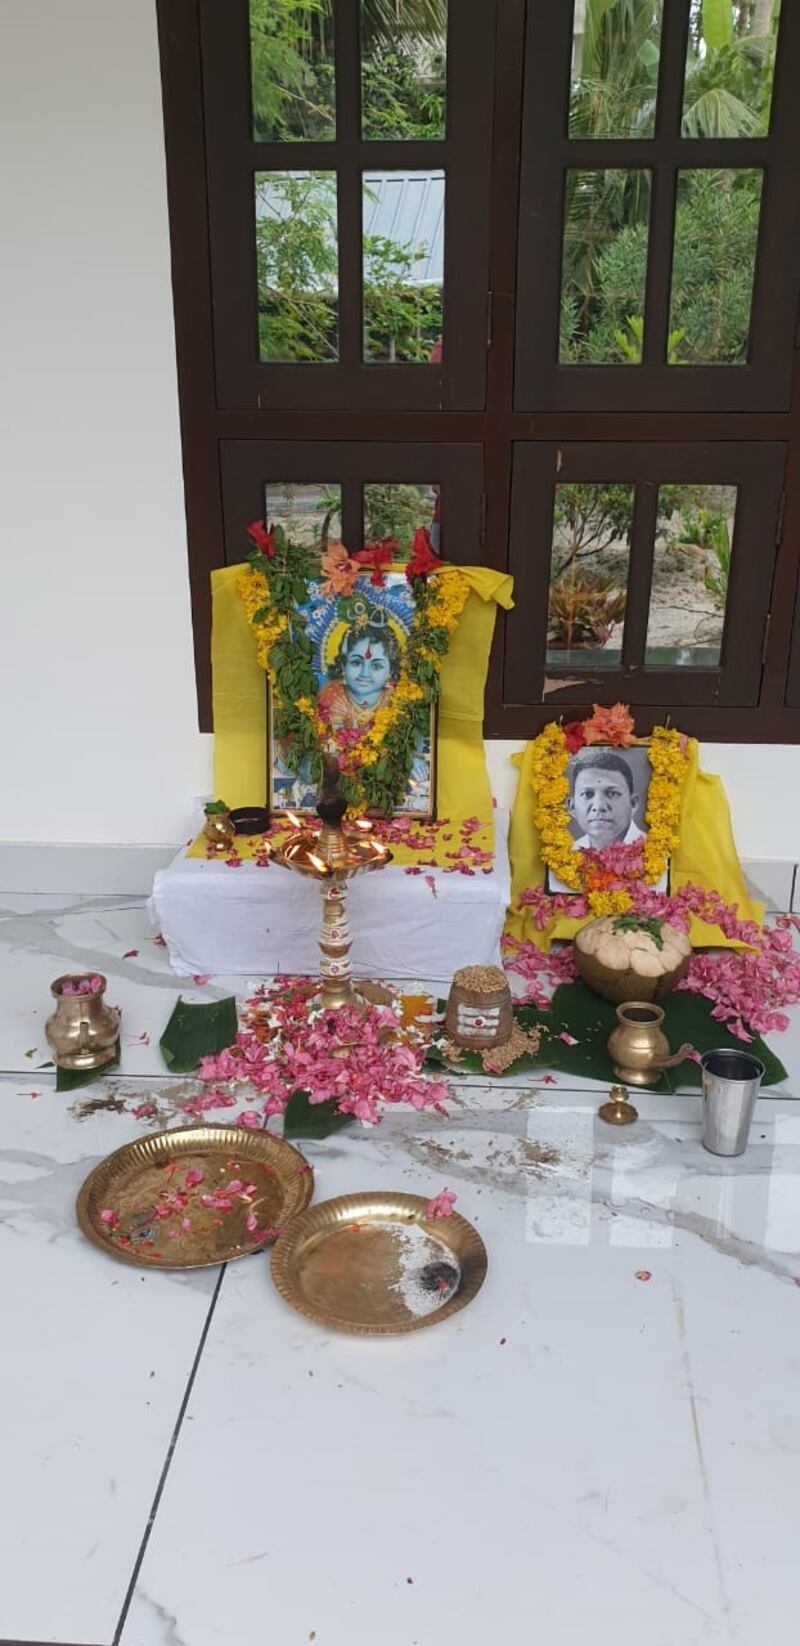 Prayers and flowers are offered by the family of Deepa Kumar in Kerala, southern India three years to the day he died in a car accident on Monday. Photo: Kumar family